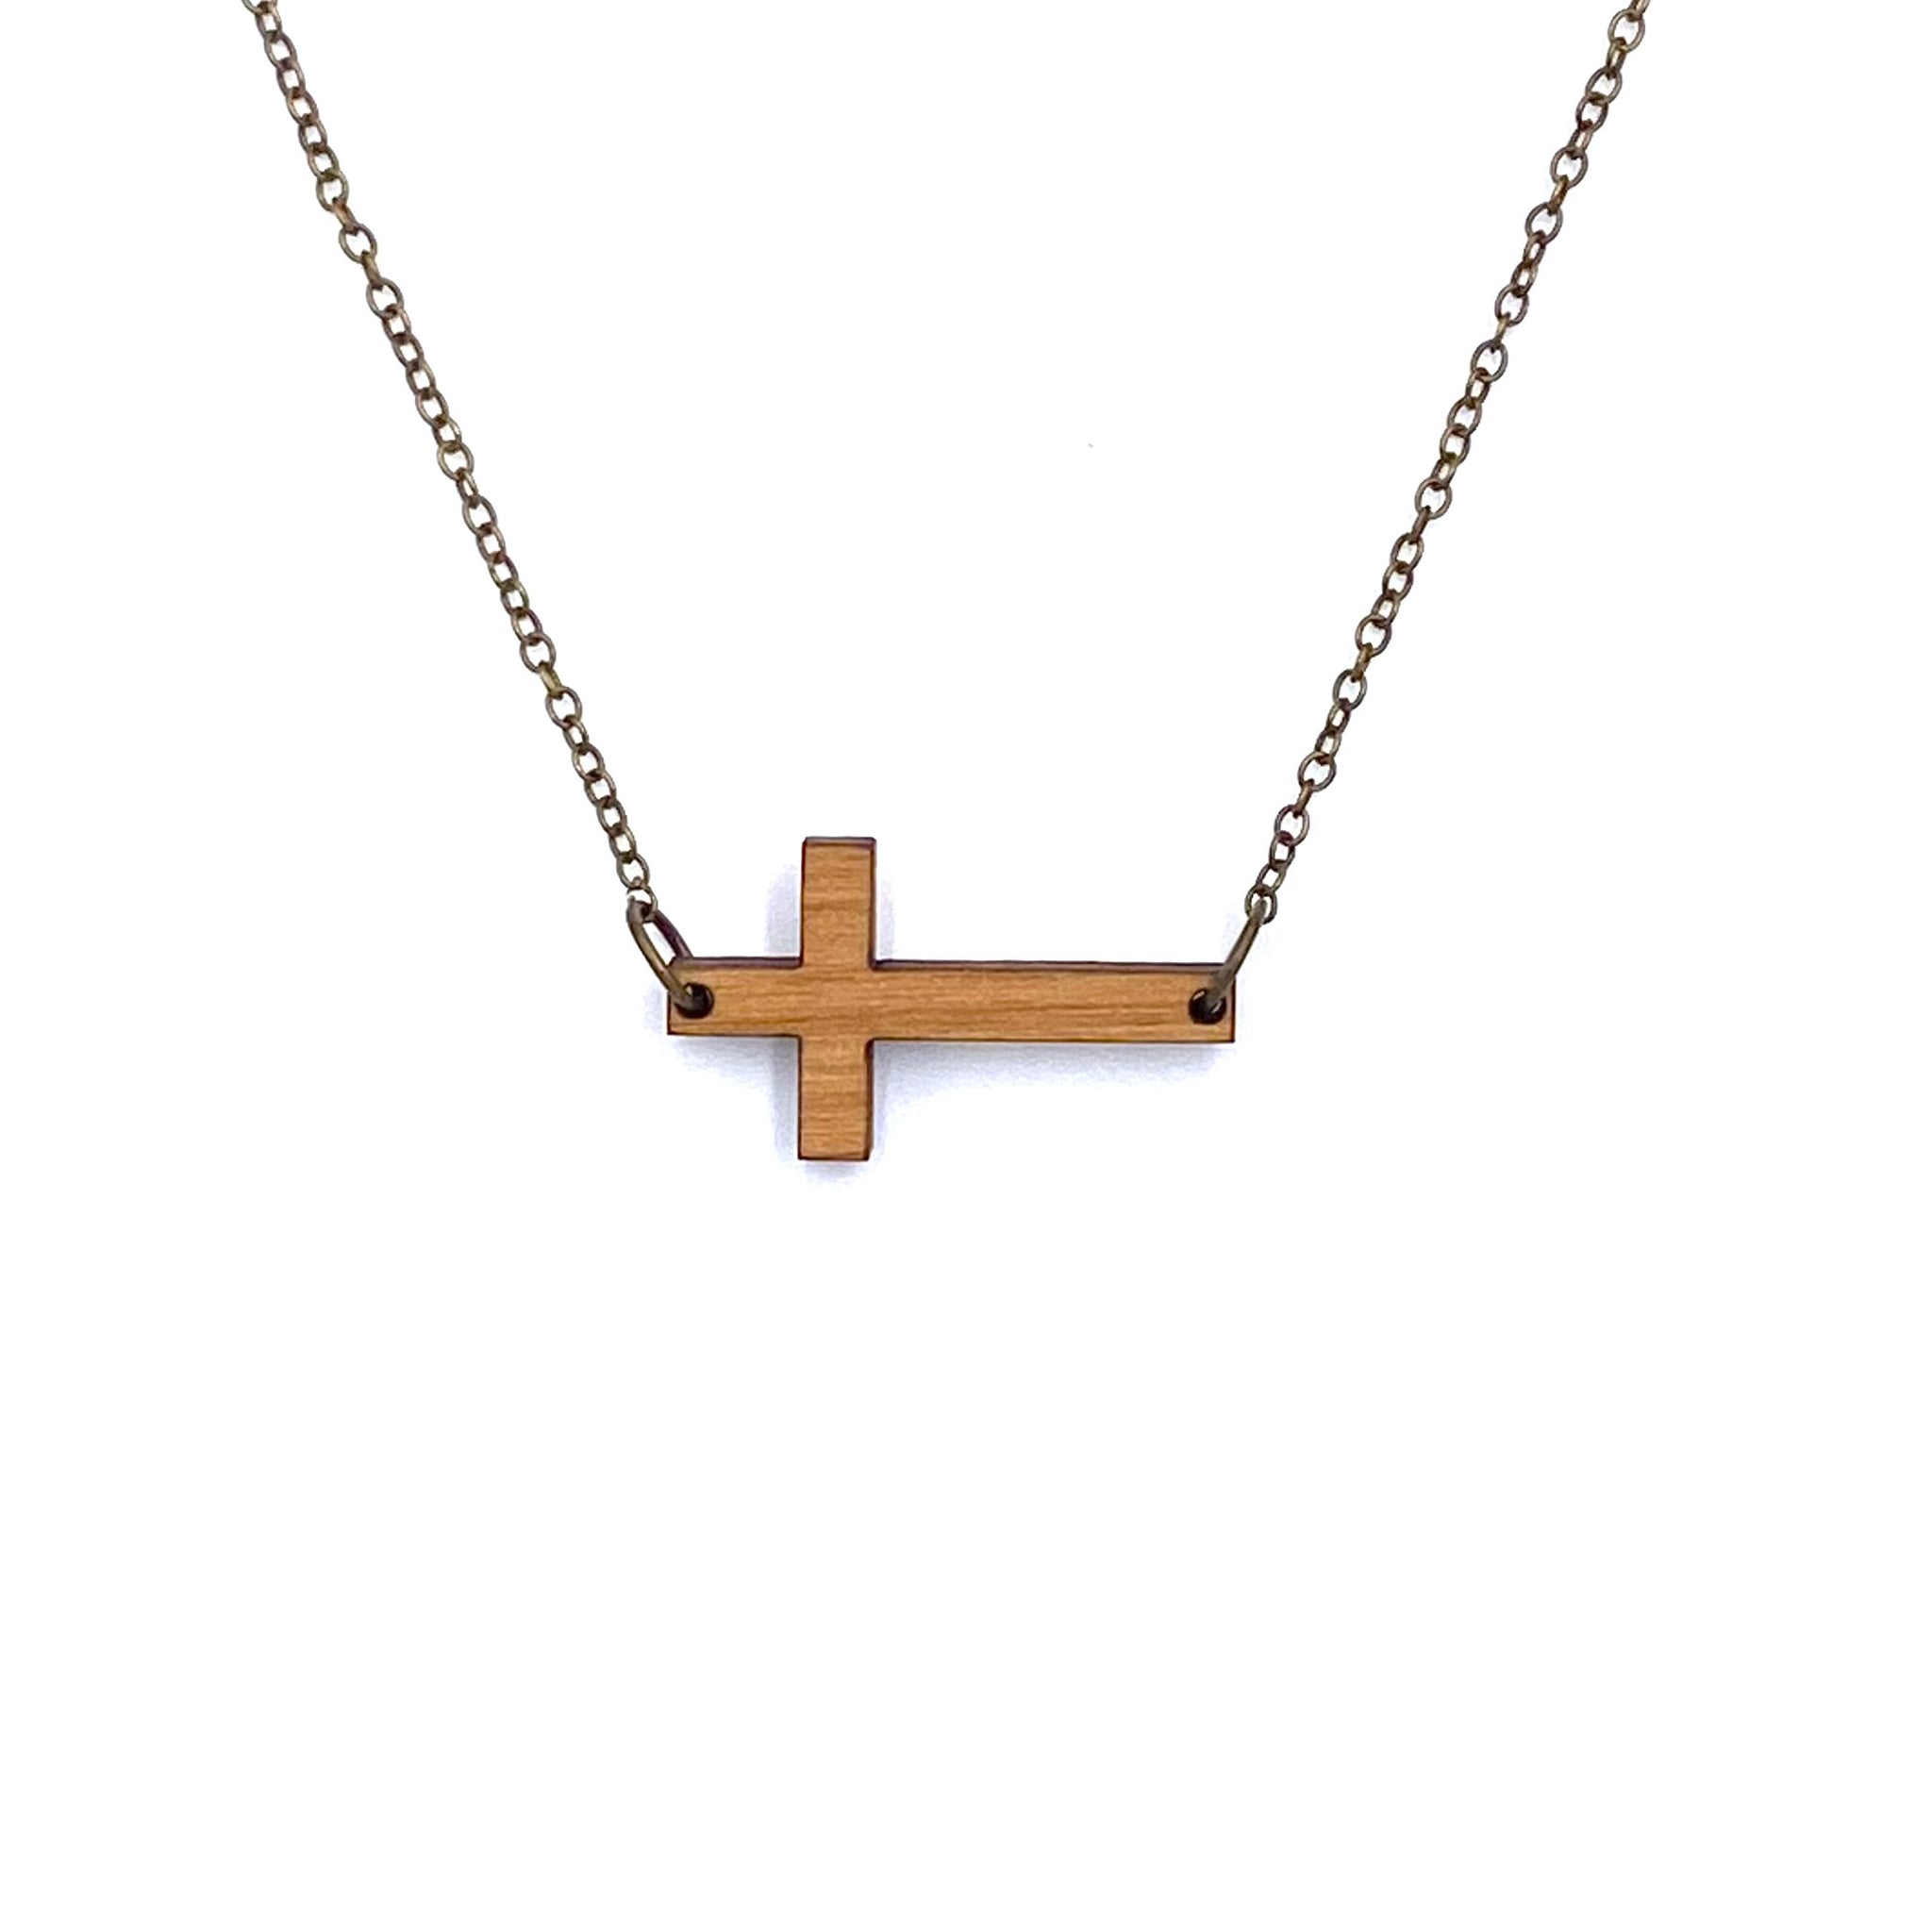 Olive Wood Cross Cutout Necklace with Pointed Edges - Walmart.com